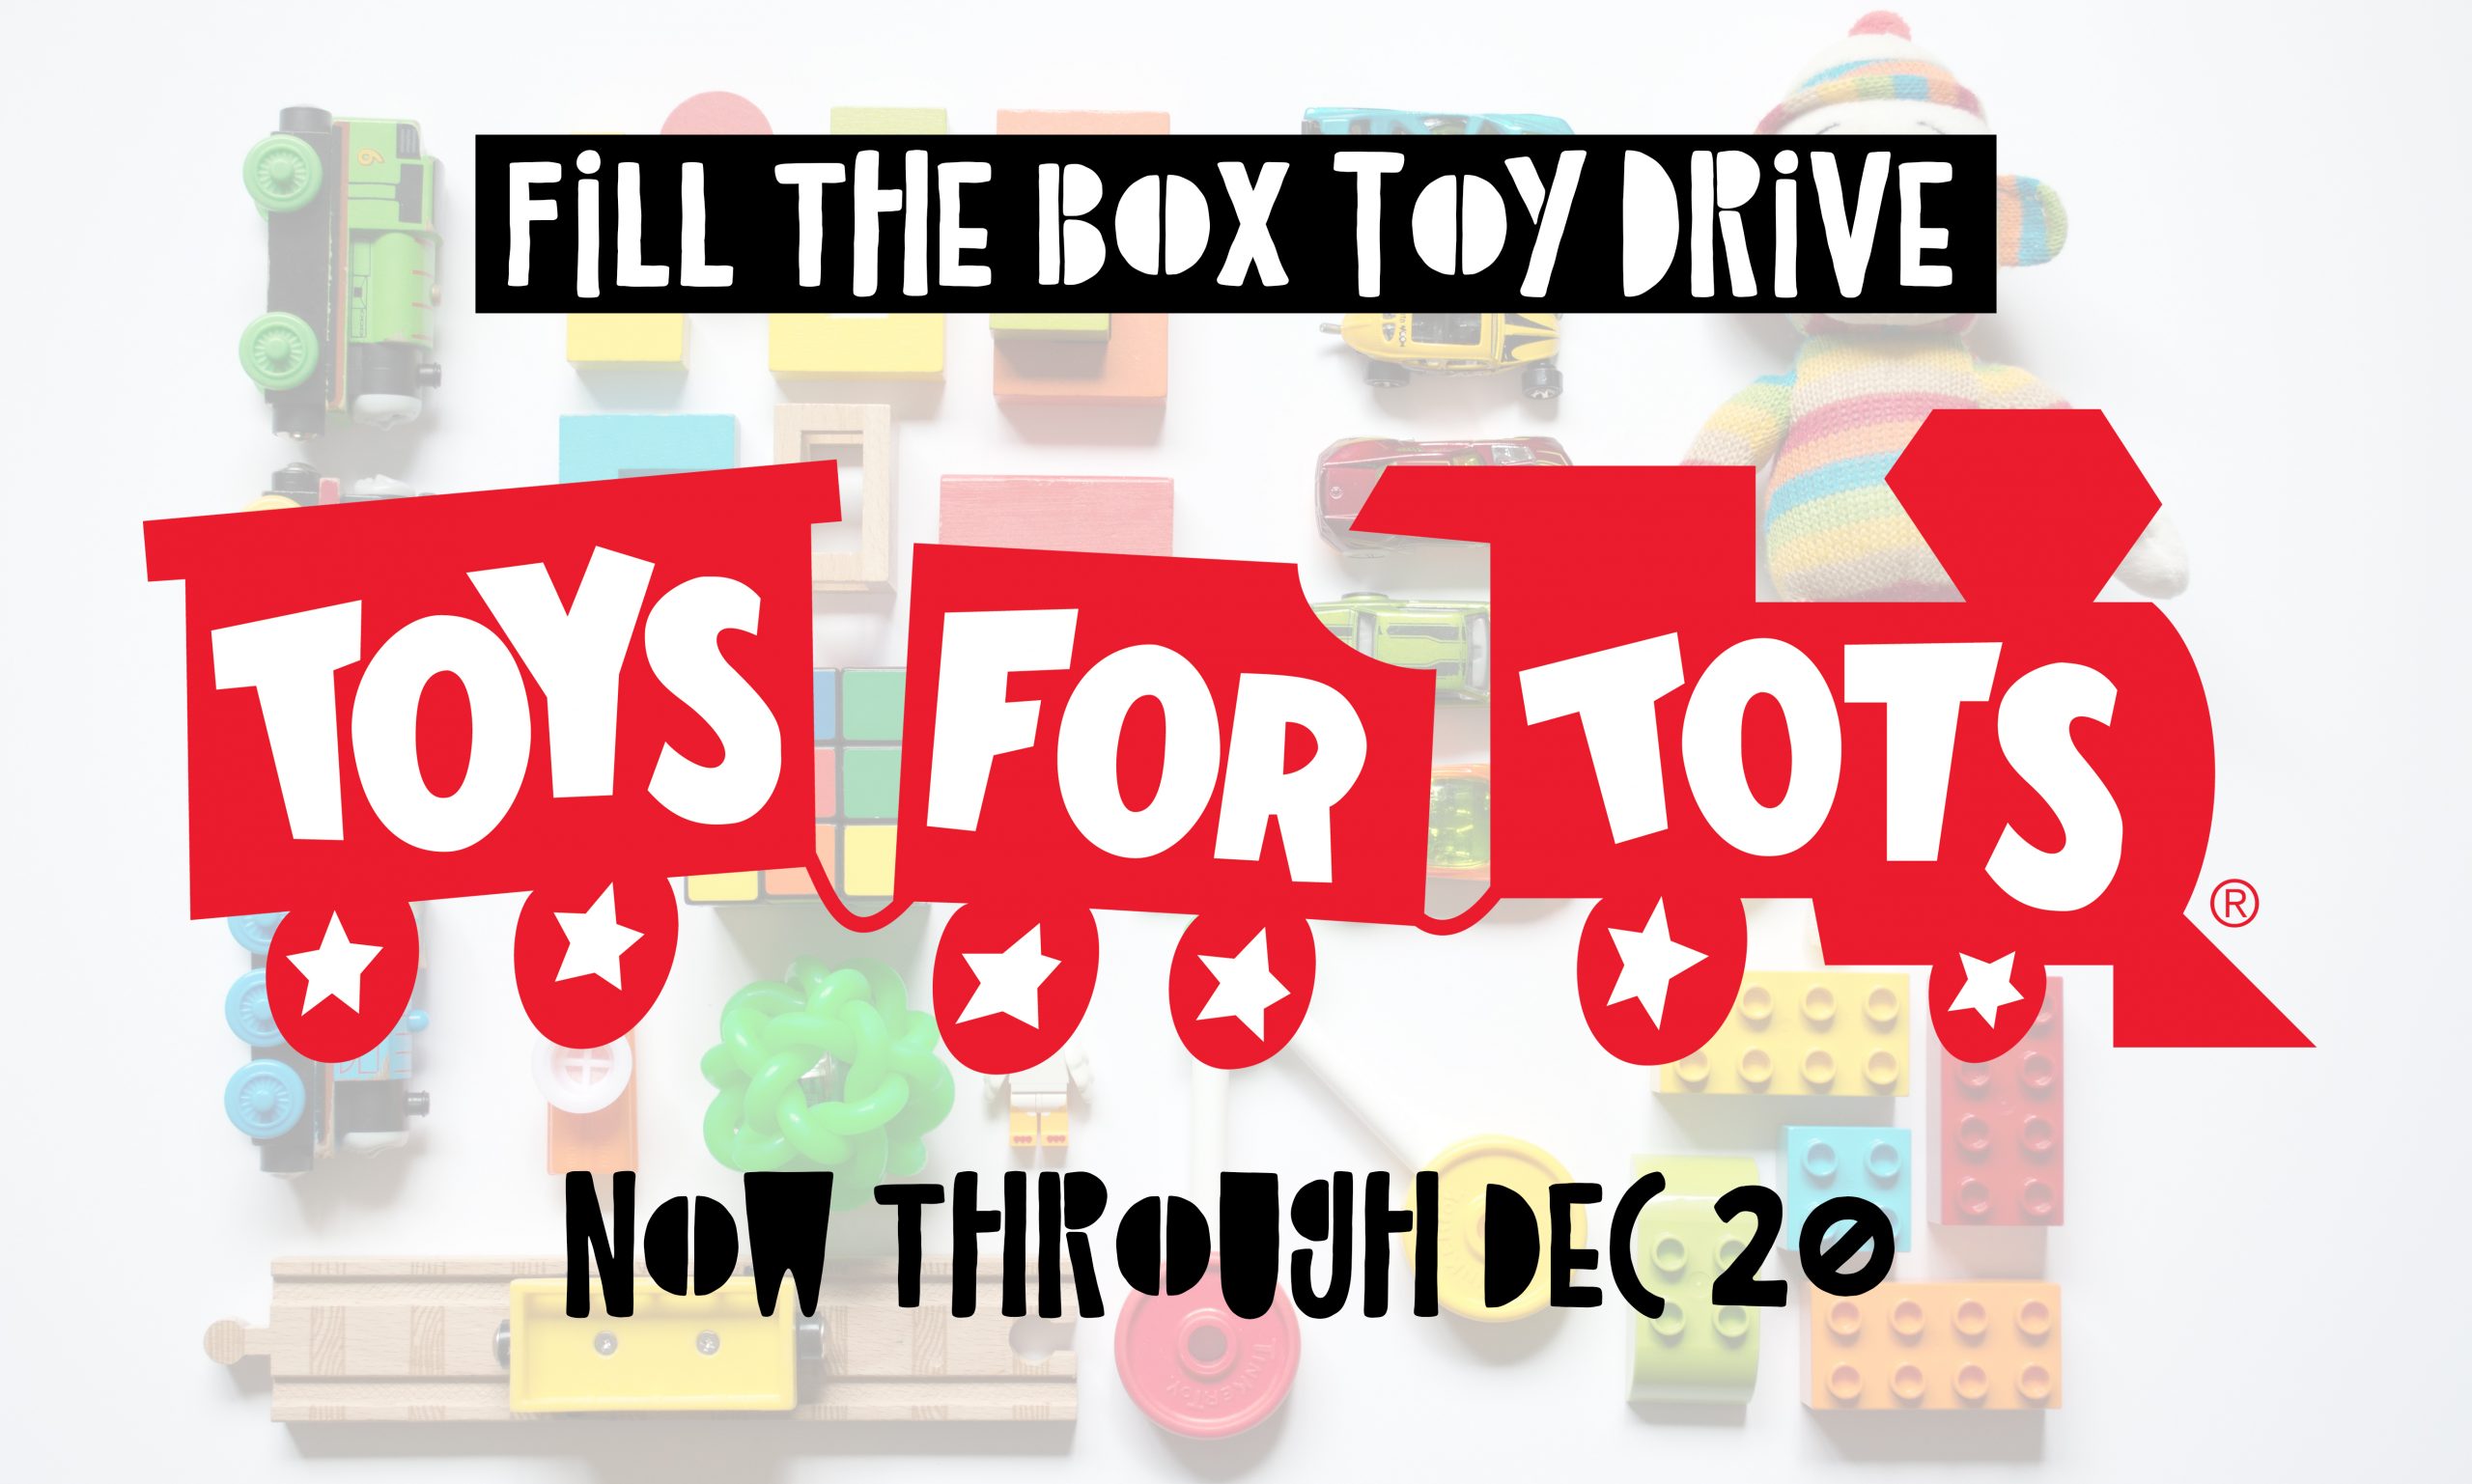 The Toys for Tots logo on top of a background of toys like legos and trains. Text reads "Fill the box to drive: Toys for Tots. Now through Dec 20"